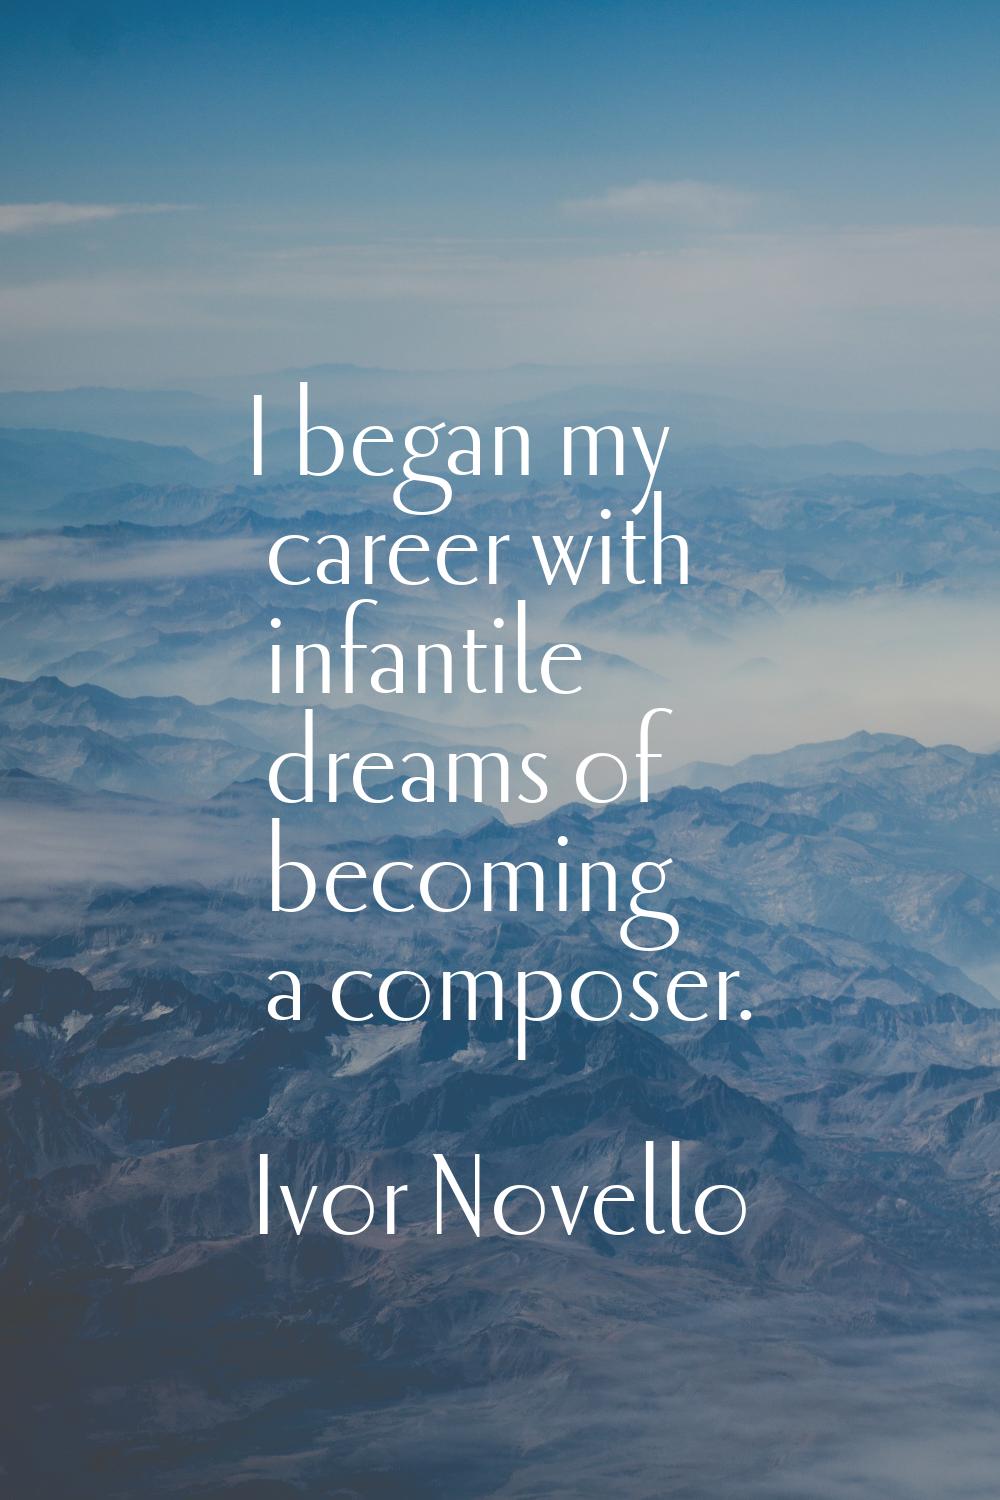 I began my career with infantile dreams of becoming a composer.